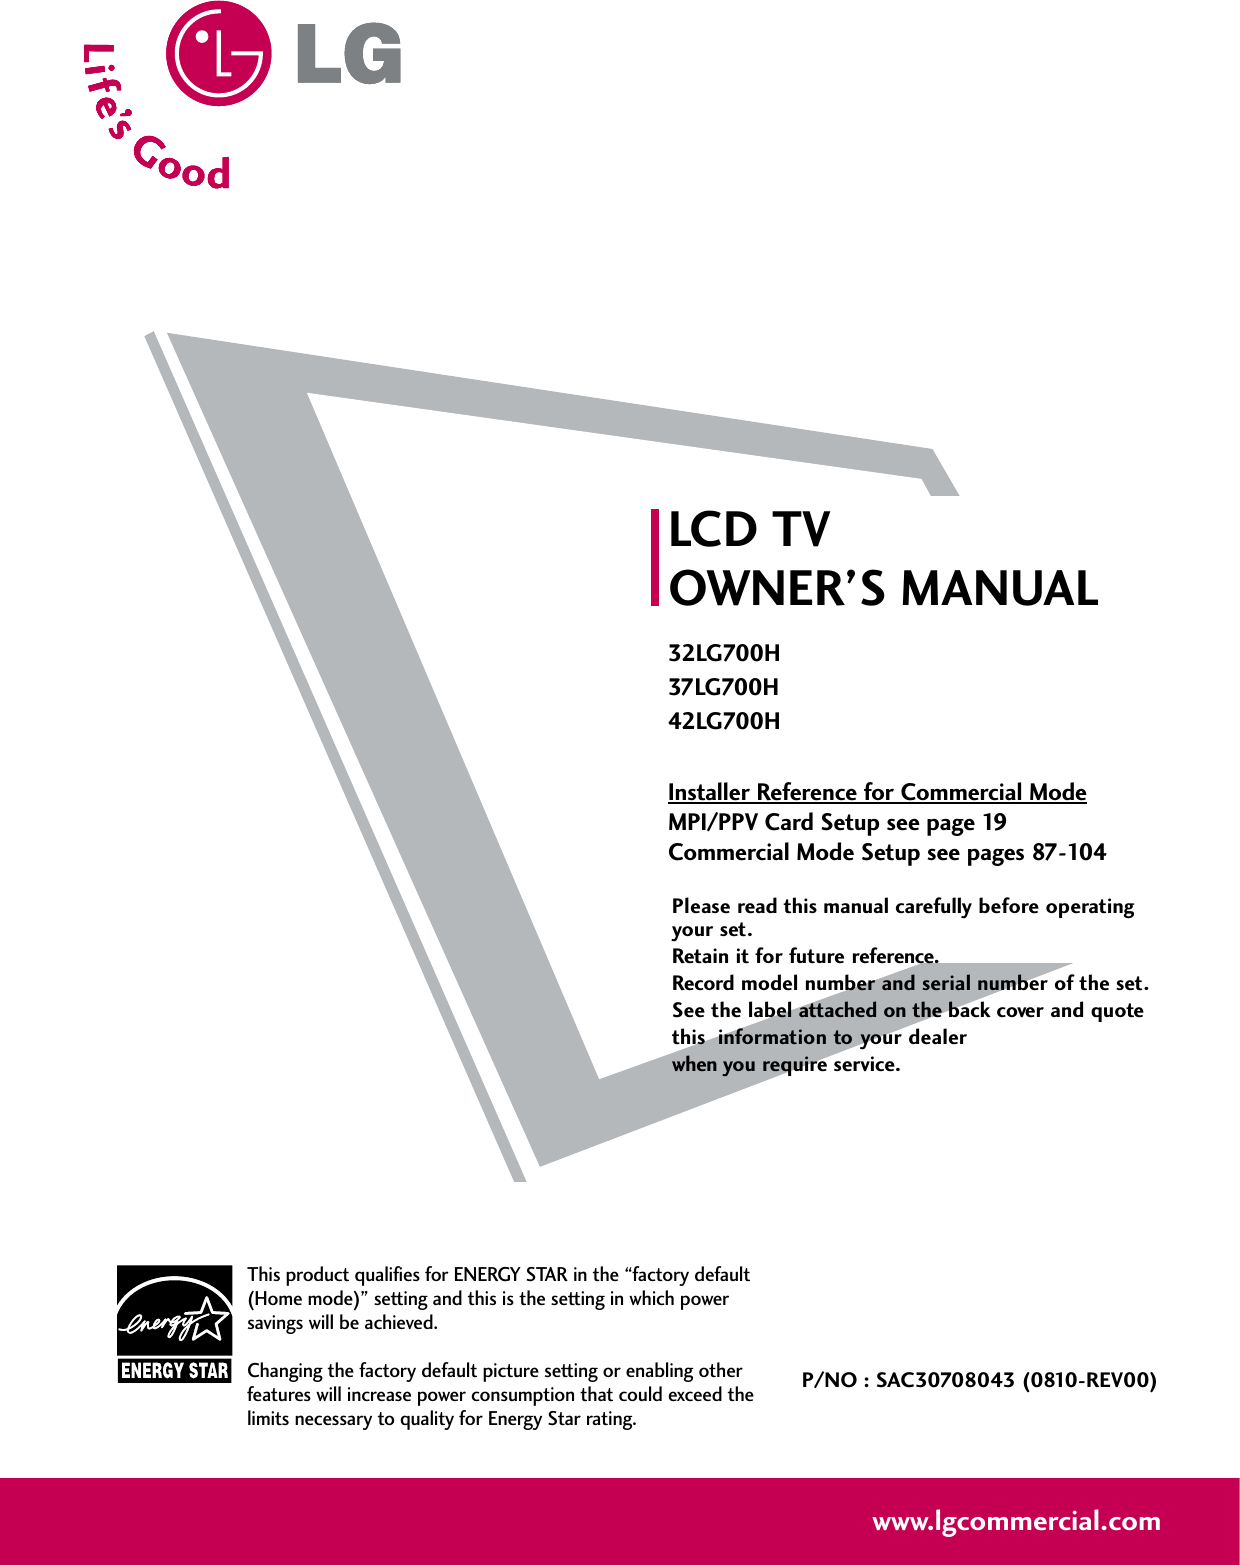 Please read this manual carefully before operatingyour set. Retain it for future reference.Record model number and serial number of the set. See the label attached on the back cover and quote this  information to your dealer when you require service.LCD TVOWNER’S MANUAL32LG700H37LG700H42LG700HInstaller Reference for Commercial ModeMPI/PPV Card Setup see page 19Commercial Mode Setup see pages 87-104P/NO : SAC30708043 (0810-REV00)www.lgcommercial.comThis product qualifies for ENERGY STAR in the “factory default(Home mode)” setting and this is the setting in which powersavings will be achieved.Changing the factory default picture setting or enabling otherfeatures will increase power consumption that could exceed thelimits necessary to quality for Energy Star rating.